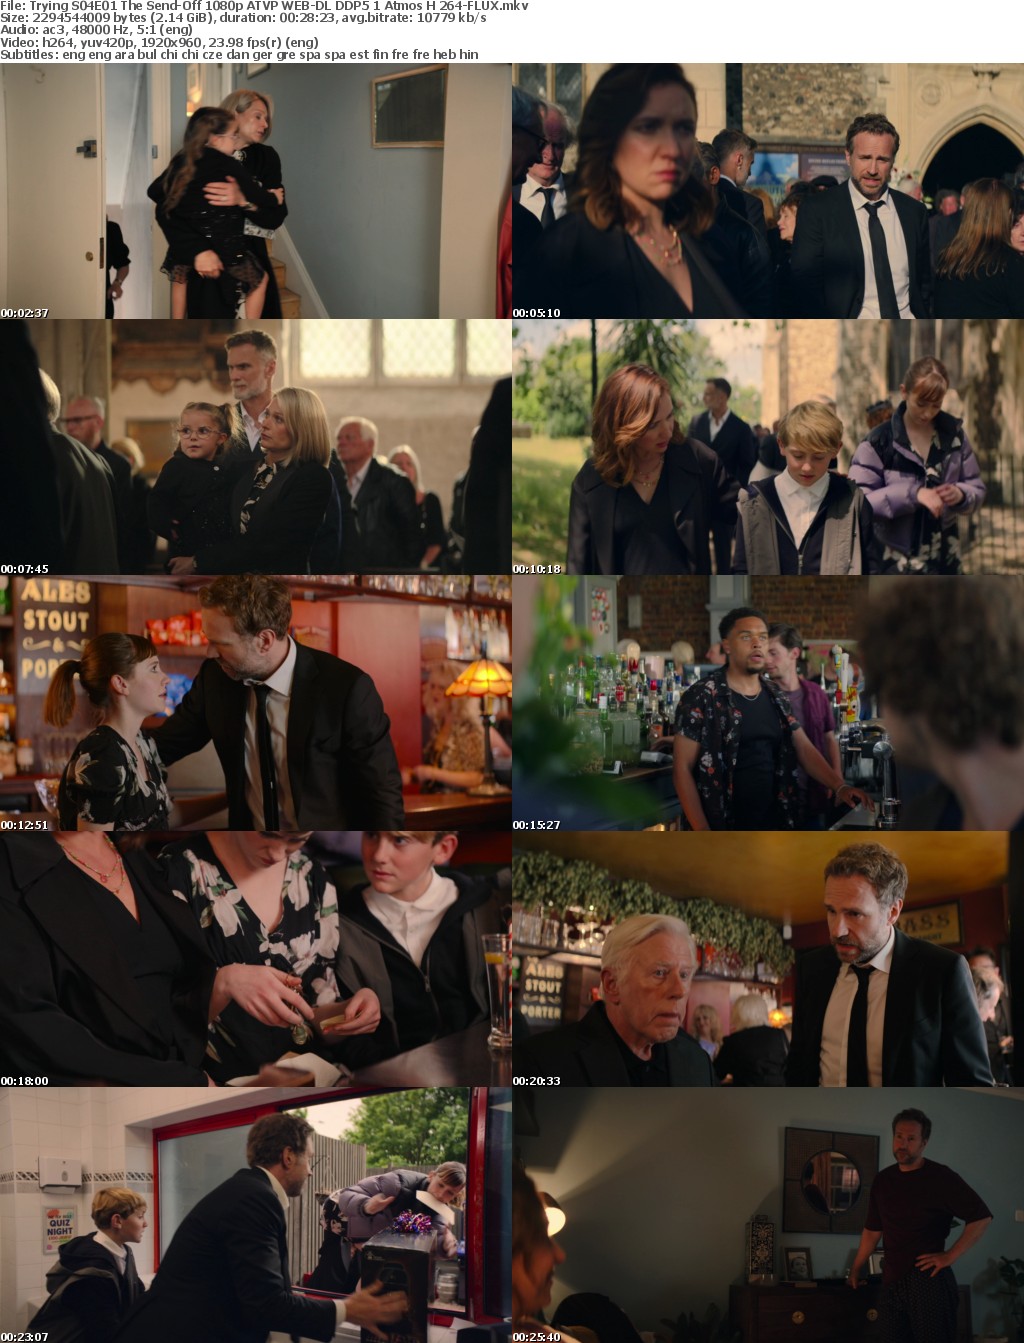 Trying S04E01 The Send-Off 1080p ATVP WEB-DL DDP5 1 Atmos H 264-FLUX